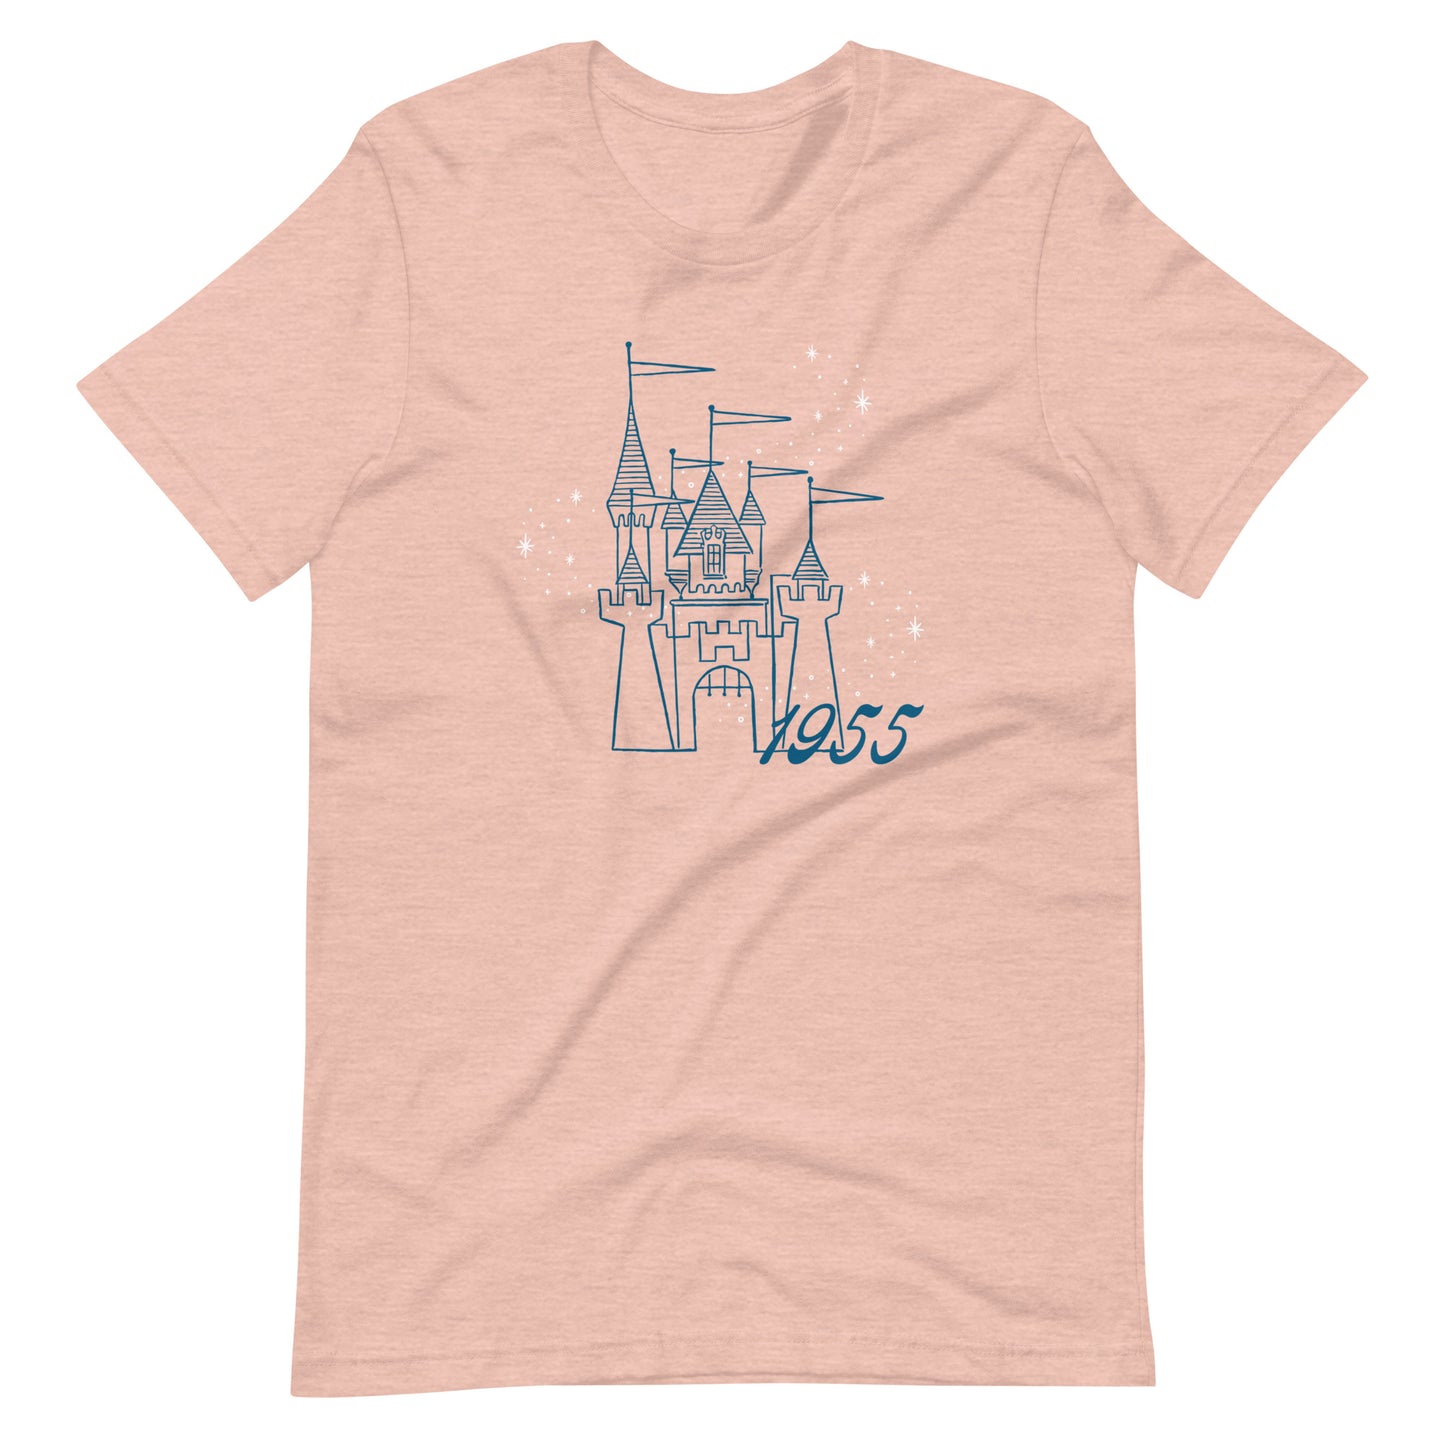 Peach t-shirt printed with vintage style sketch of a castle with the year 1955 and pixie dust above the castle.